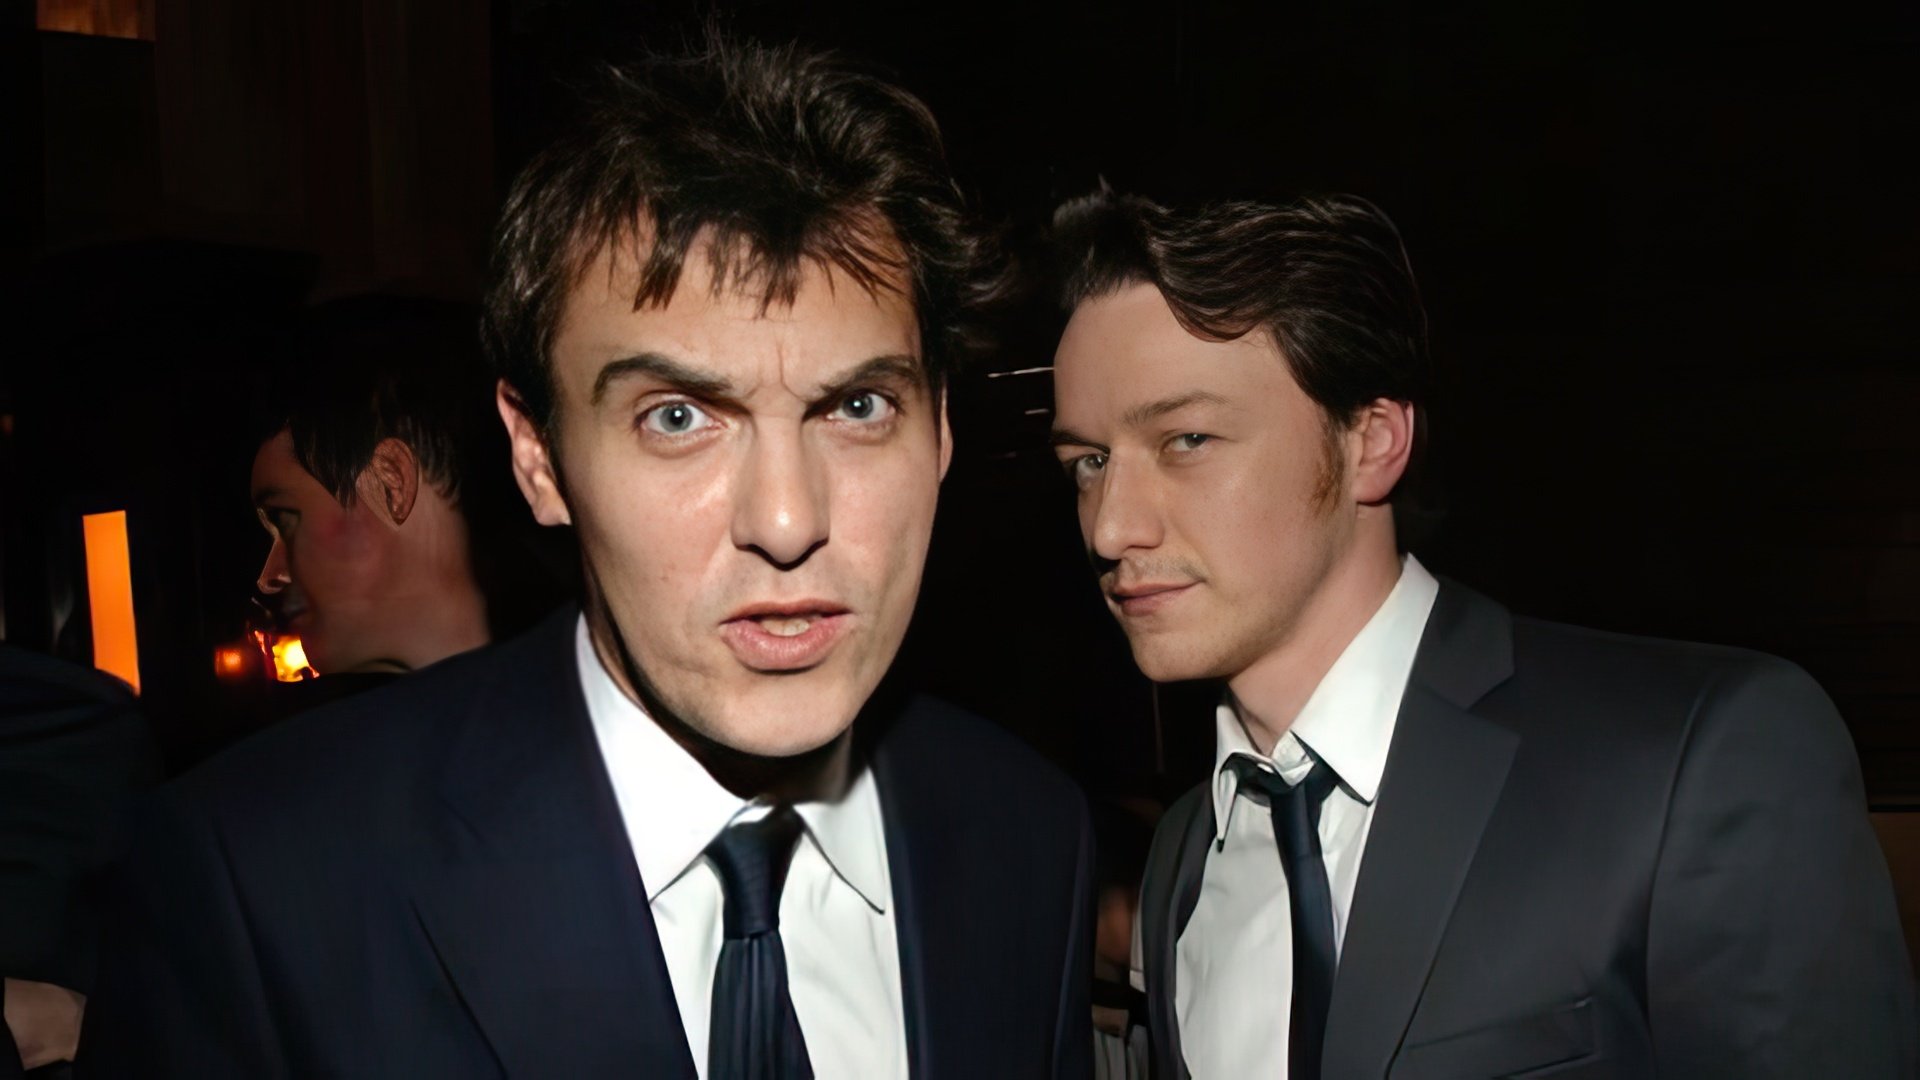 In the photo: James McAvoy and Joe Wright